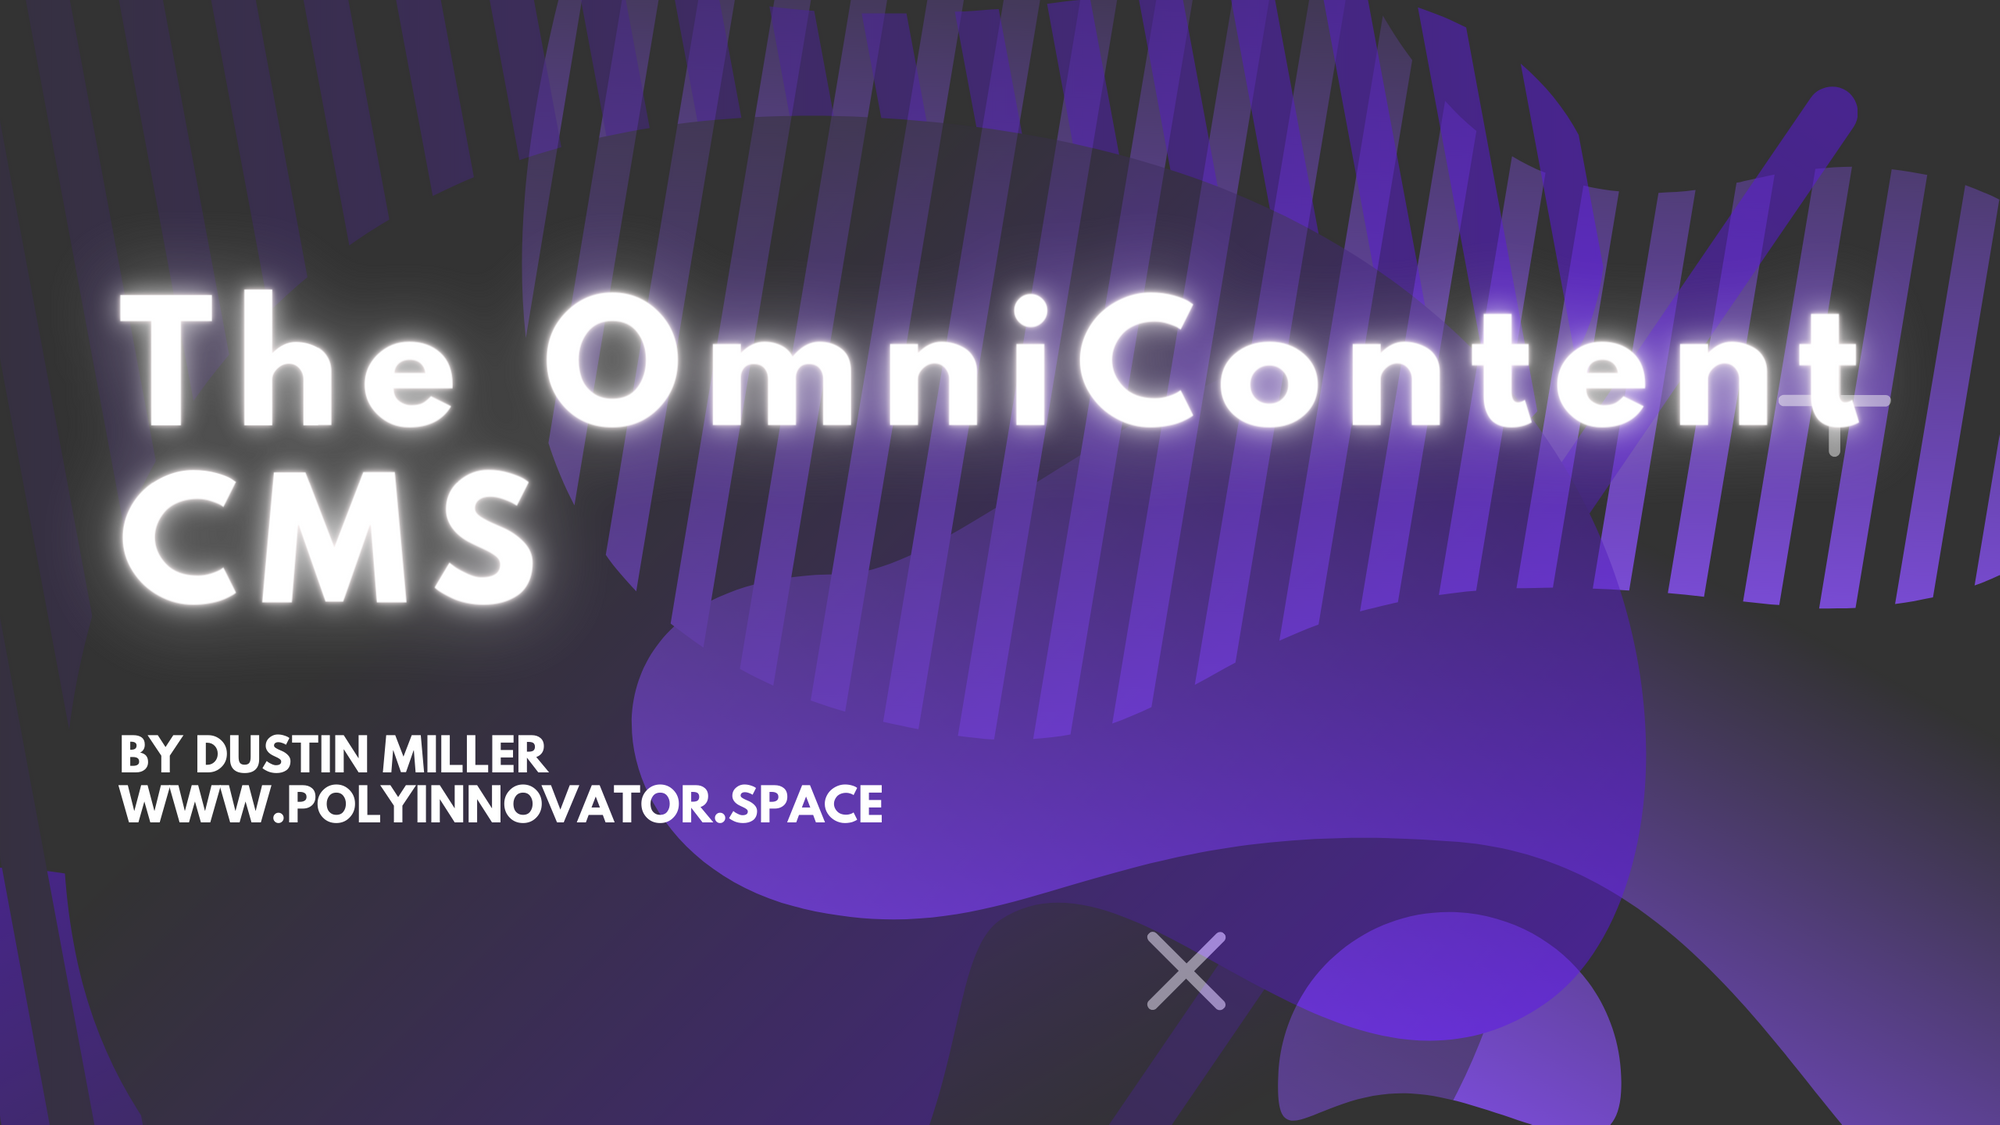 The OmniContent CMS